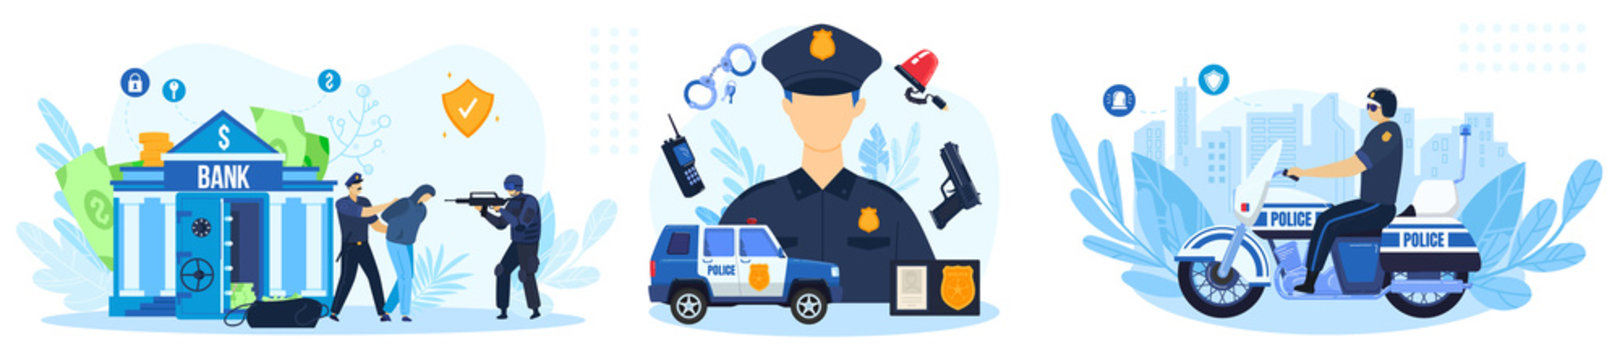 Police work vector illustration set. Cartoon flat policeman character working, policeofficer patrol people arrest thief, security officers protect bank from criminal attack robbery isolated on white